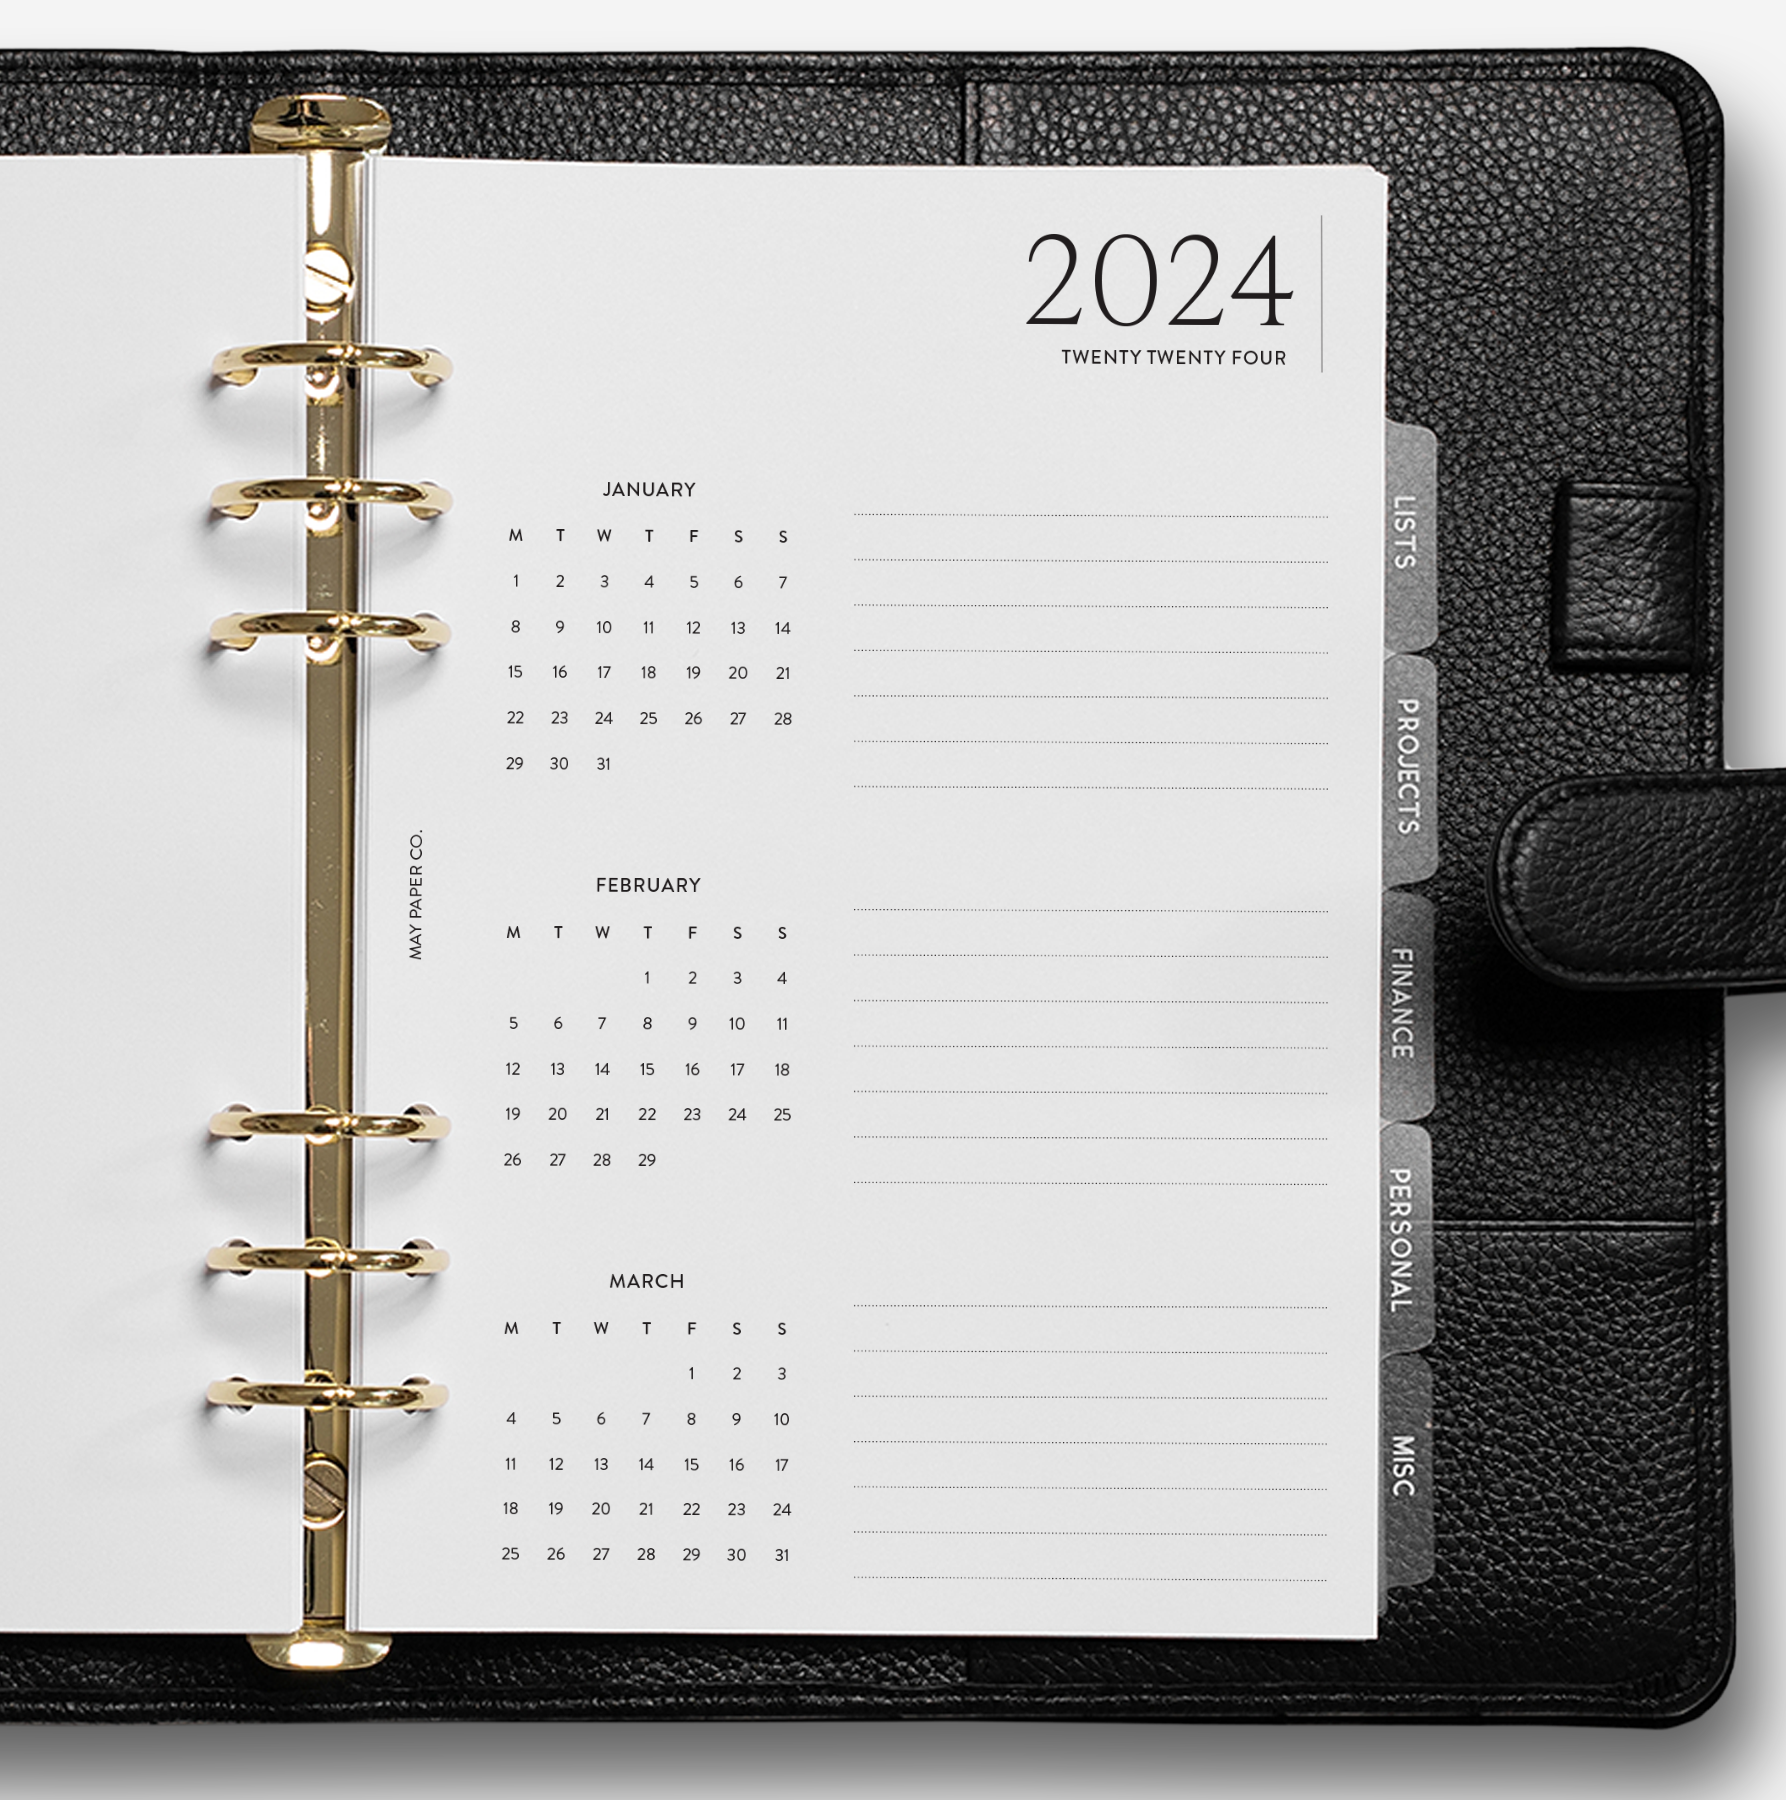 2024 Quarterly Overview (with lines) Planner Insert